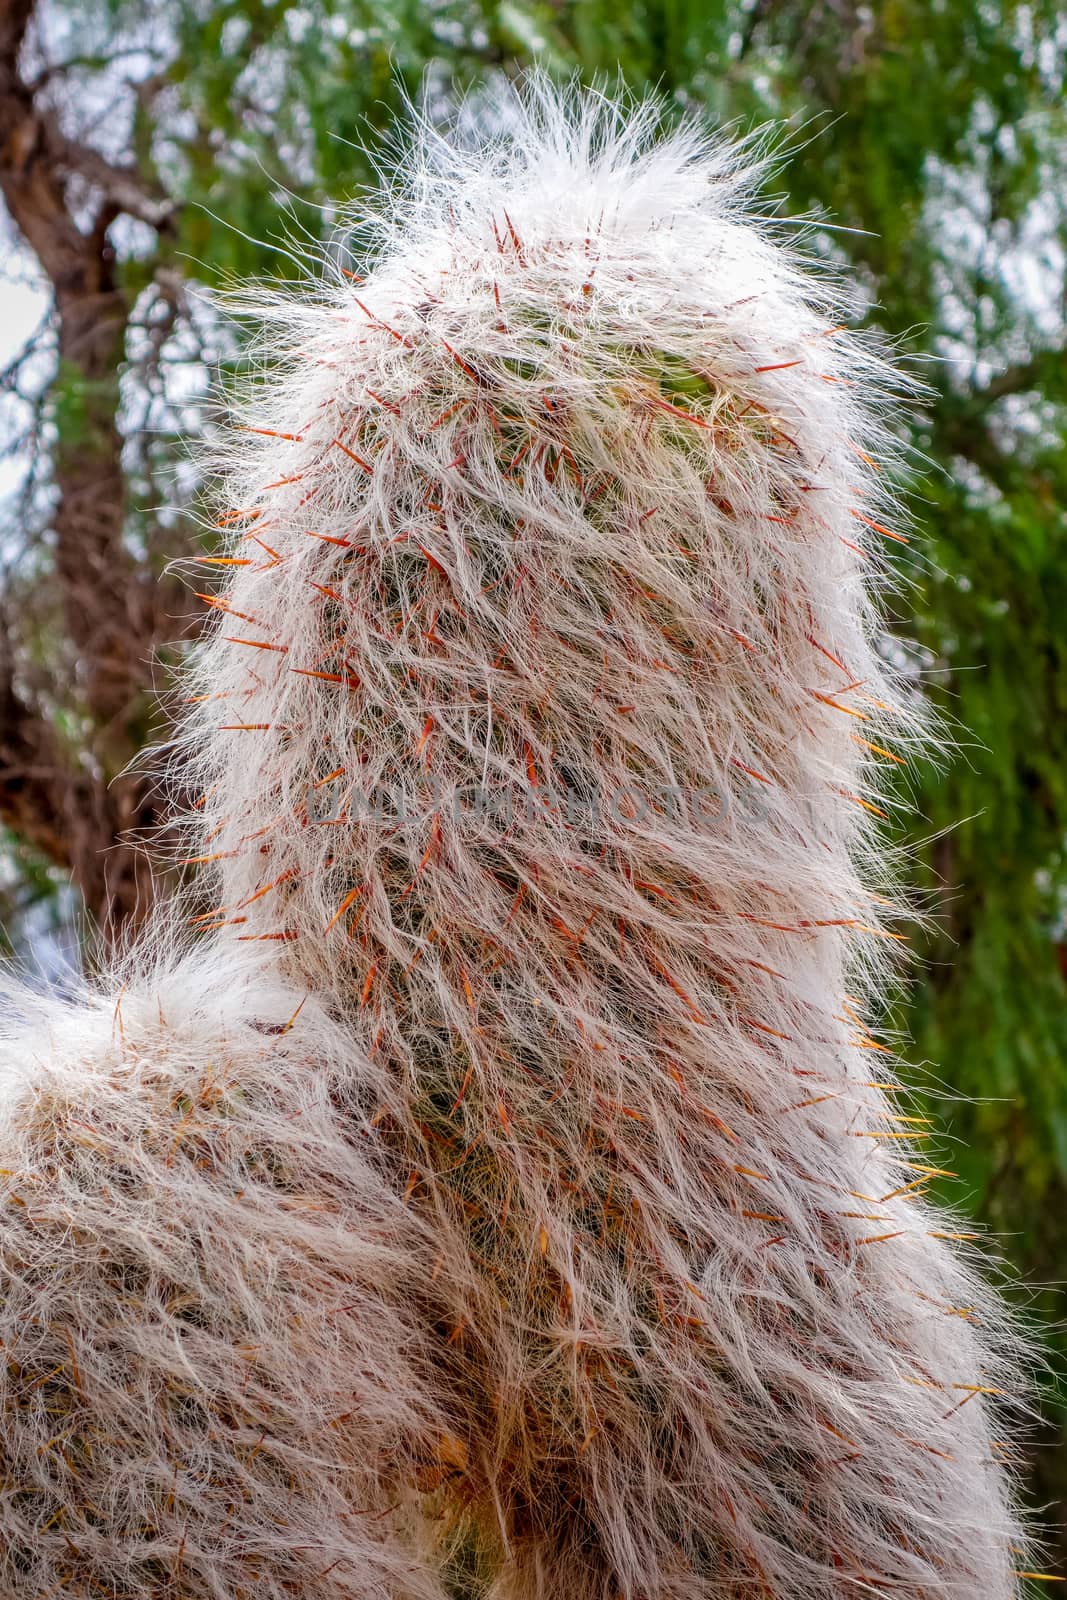 Hairy Cactus in the desert by daboost